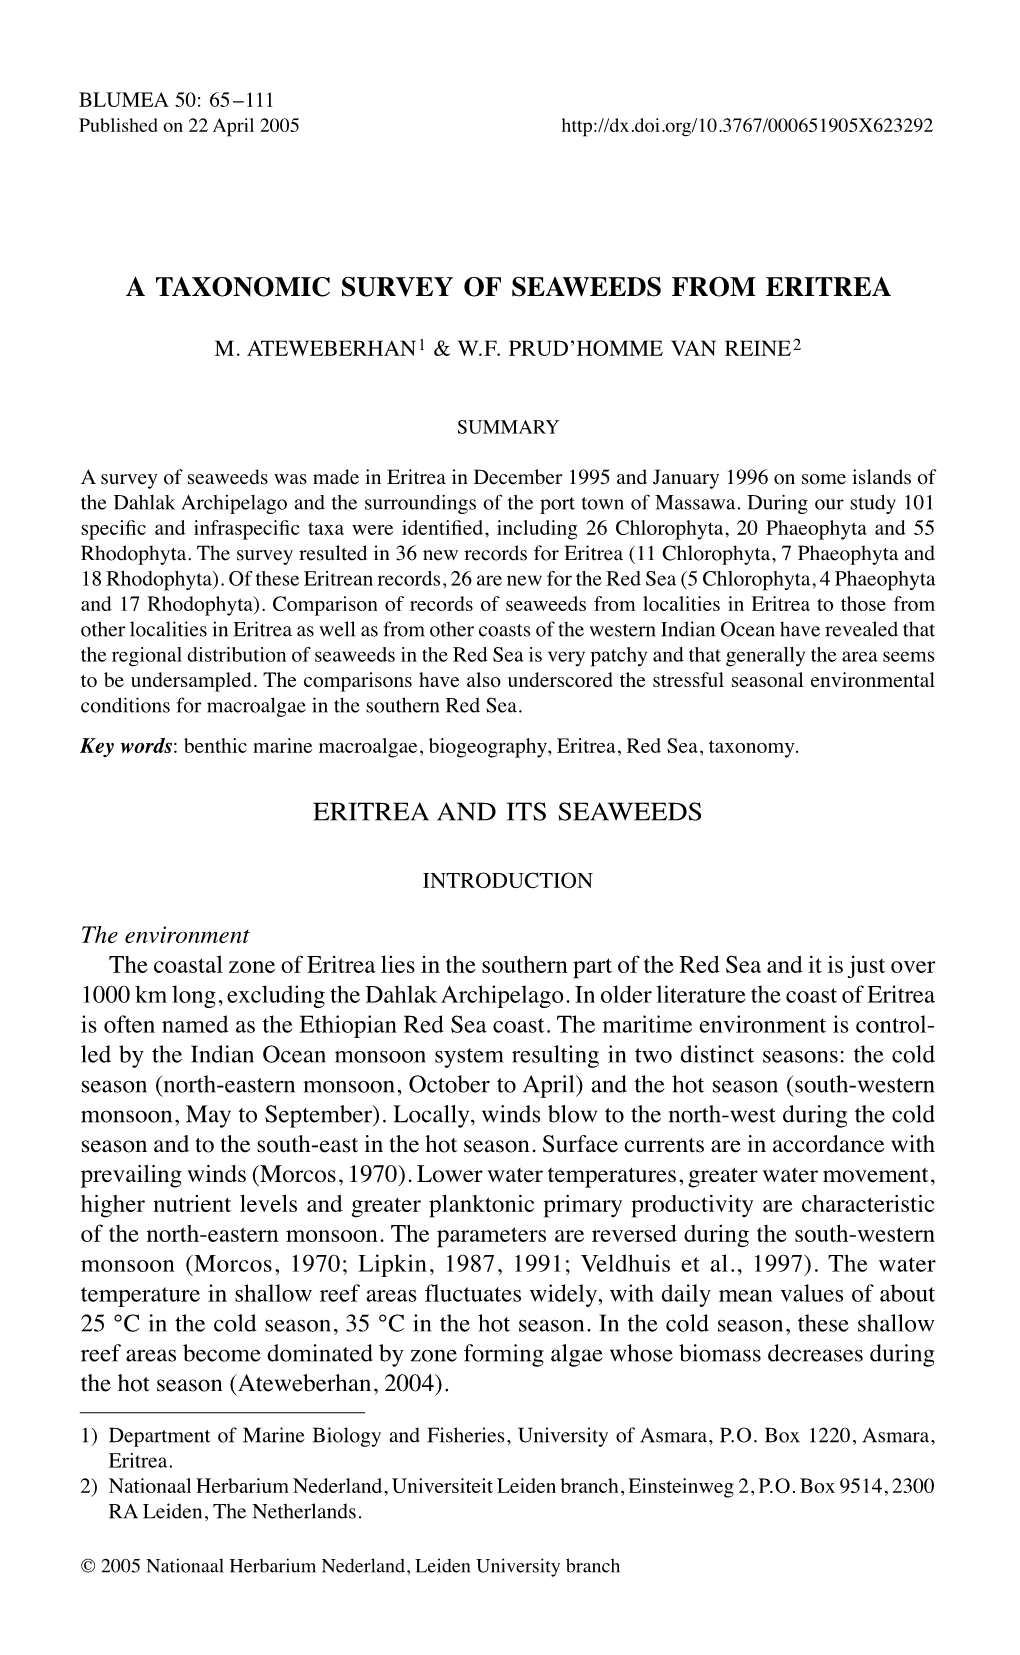 A Taxonomic Survey of Seaweeds from Eritrea